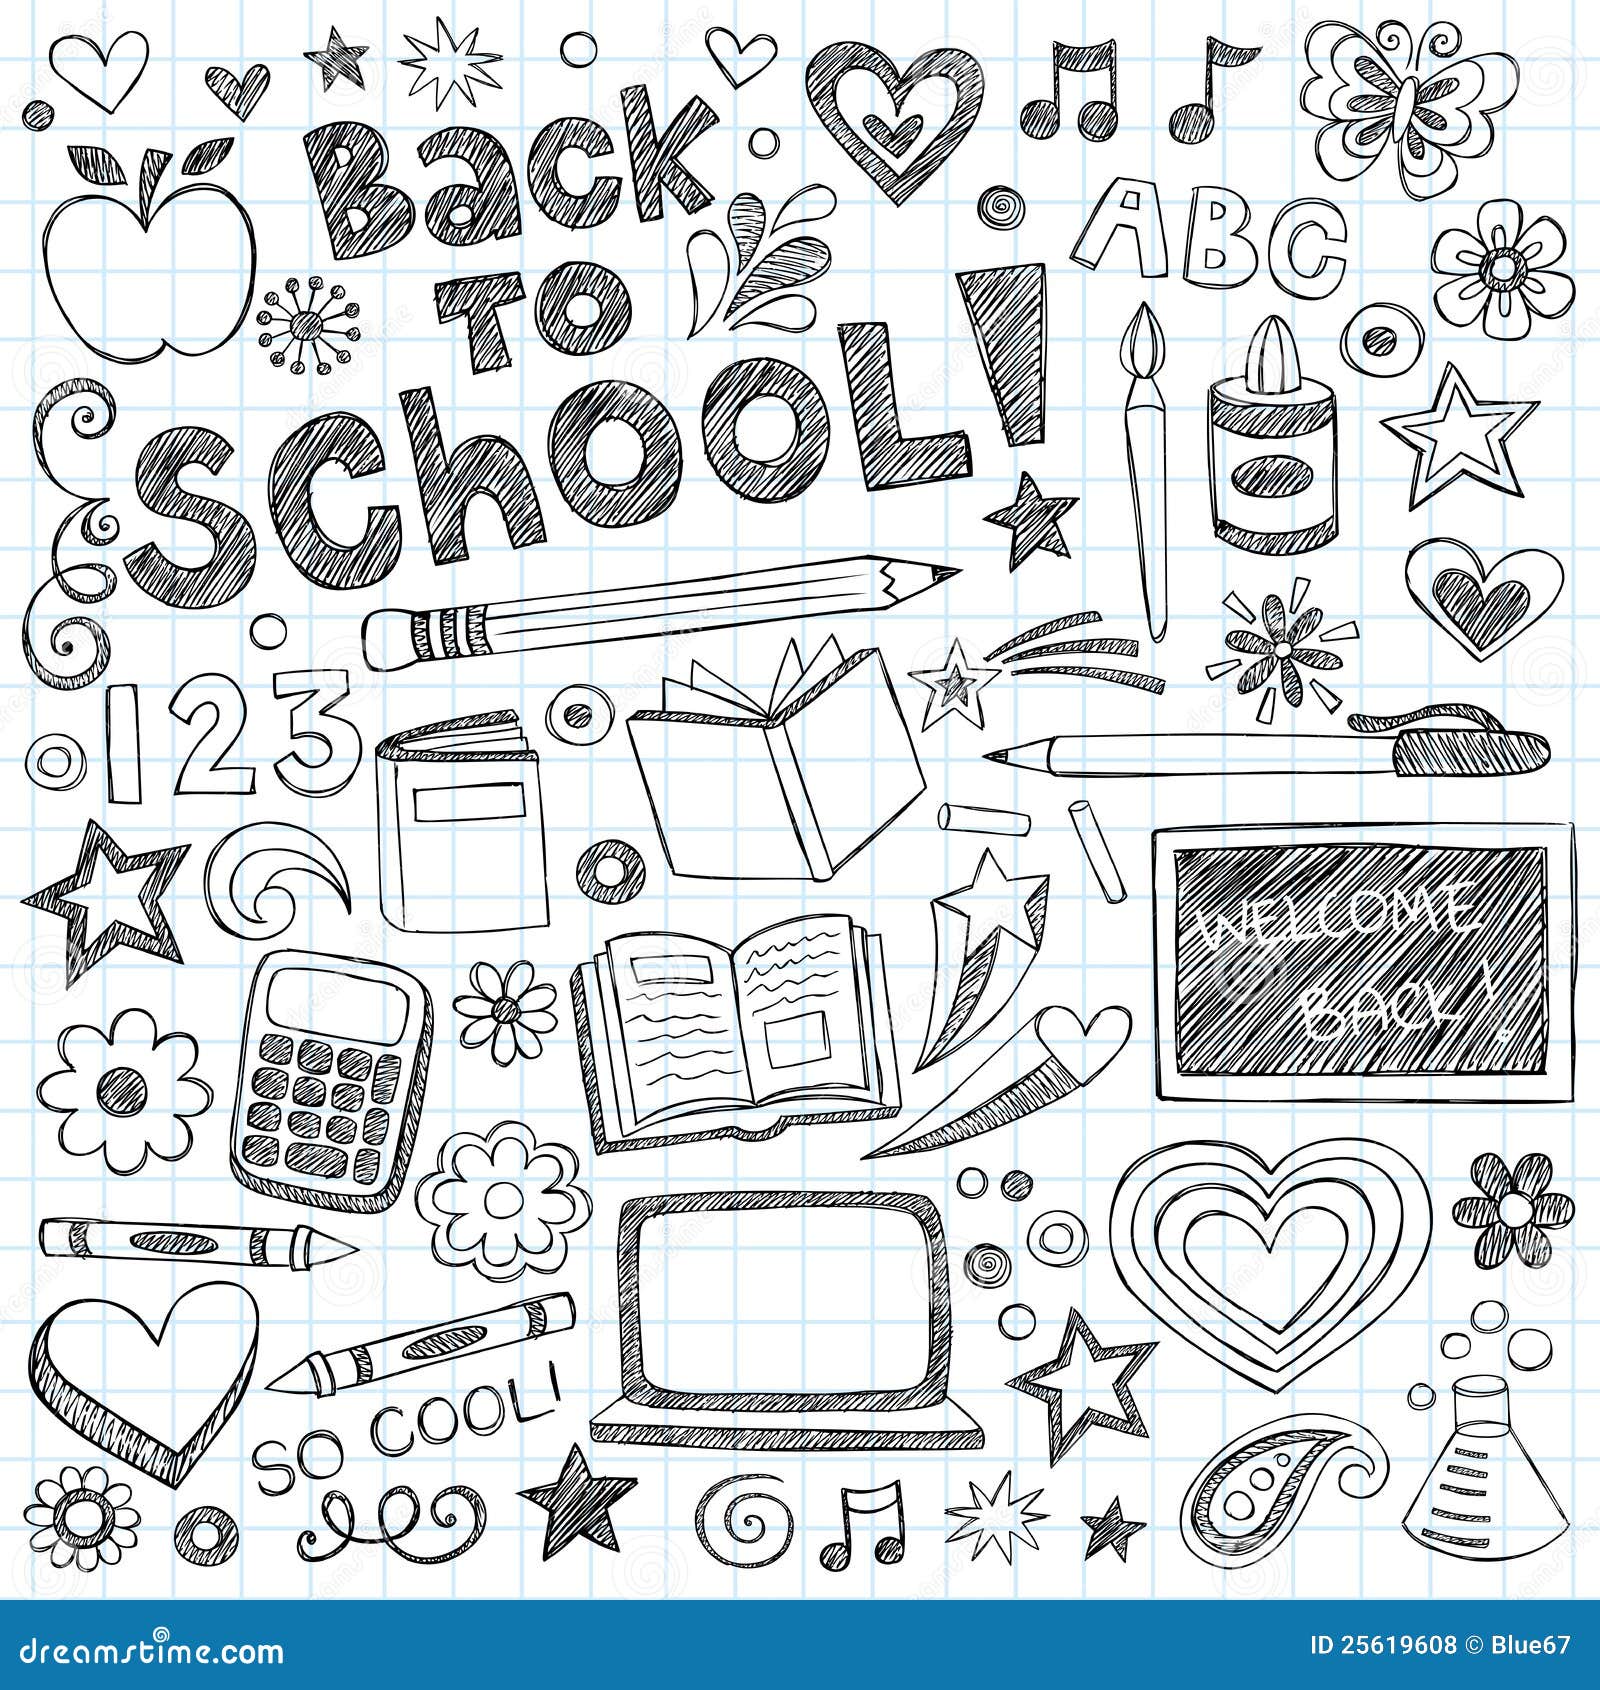 Books and school supplies design Royalty Free Vector Image